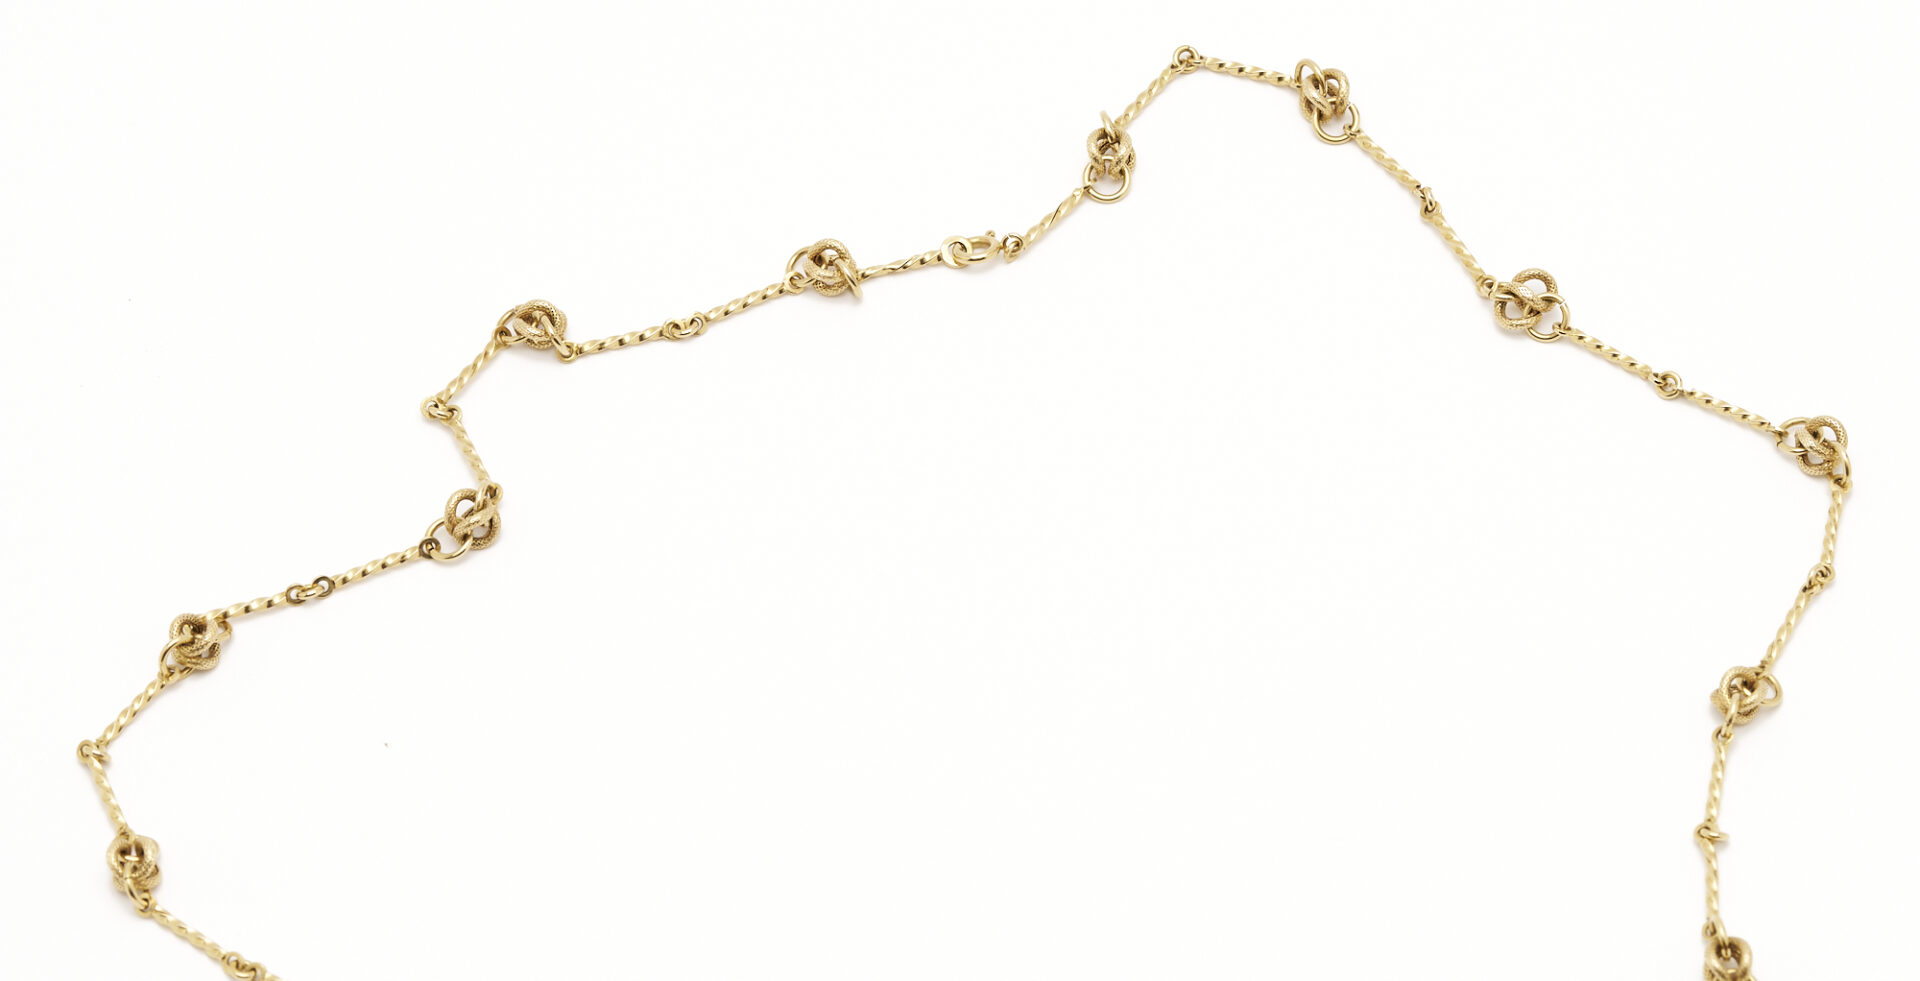 Lot 257: 18K Twisted Bar & Knot Chain Necklace